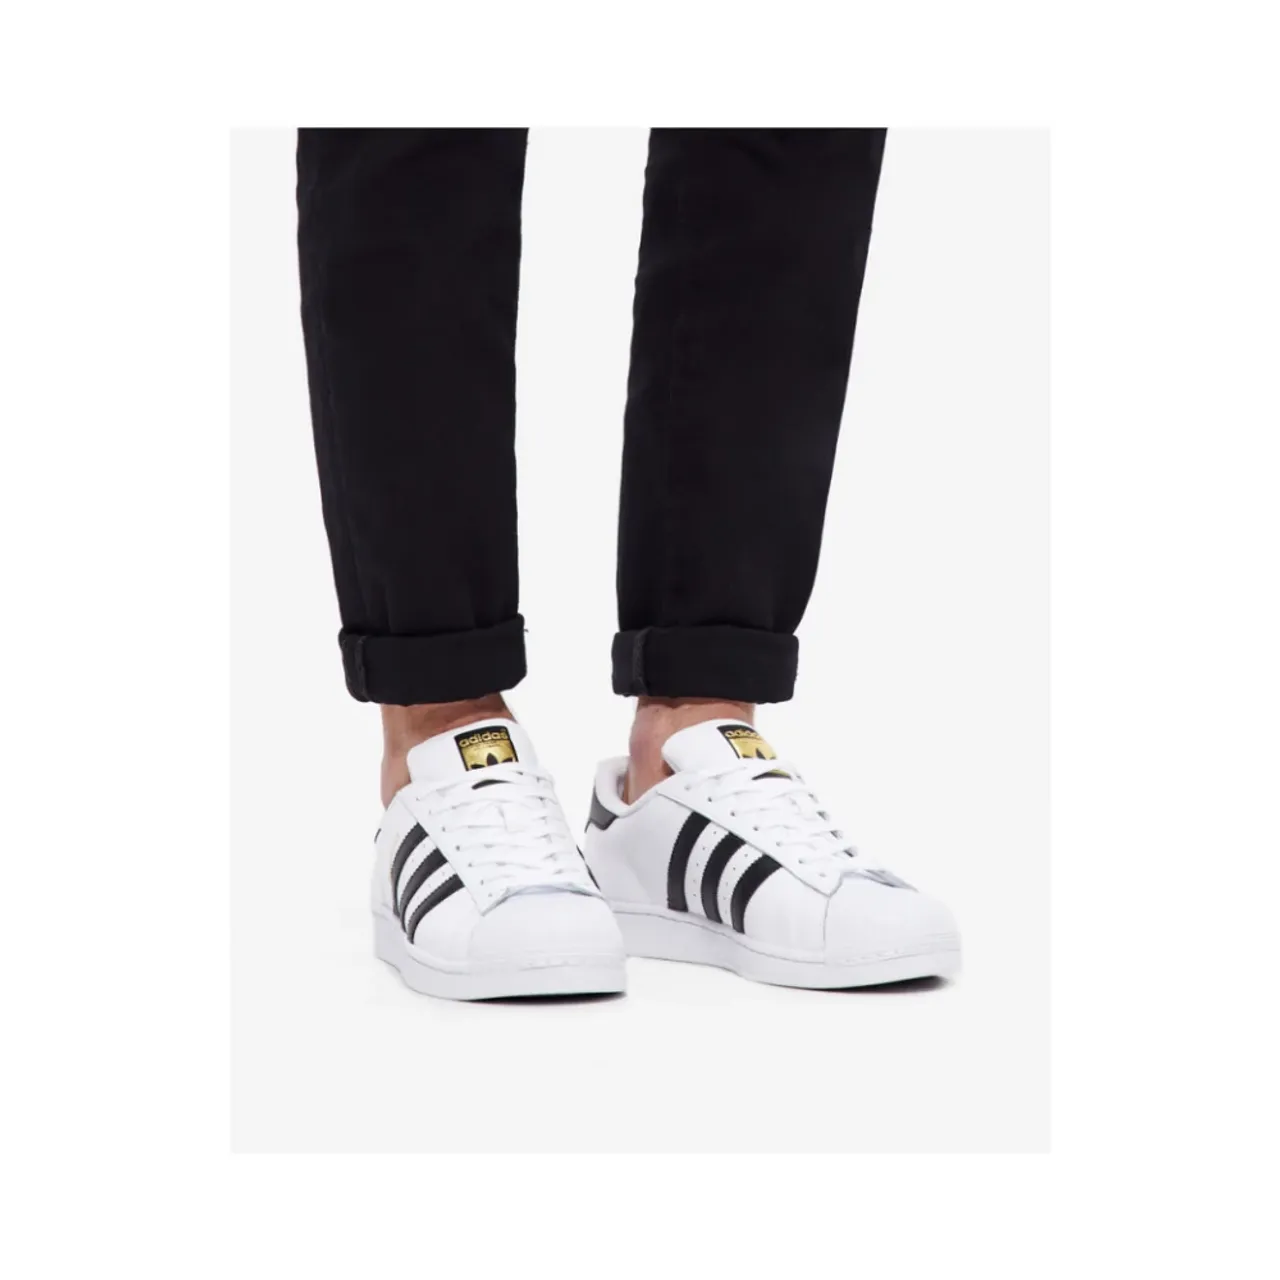 Adidas , Superstar Sneakers ,White male, Sizes: 10 UK, 9 1/3 UK, 4 2/3 UK, 13 1/3 UK, 2 2/3 UK, 14 UK, 2 UK, 35 EU, 6 UK, 12 2/3 UK, 12 UK, 1 1/2 UK